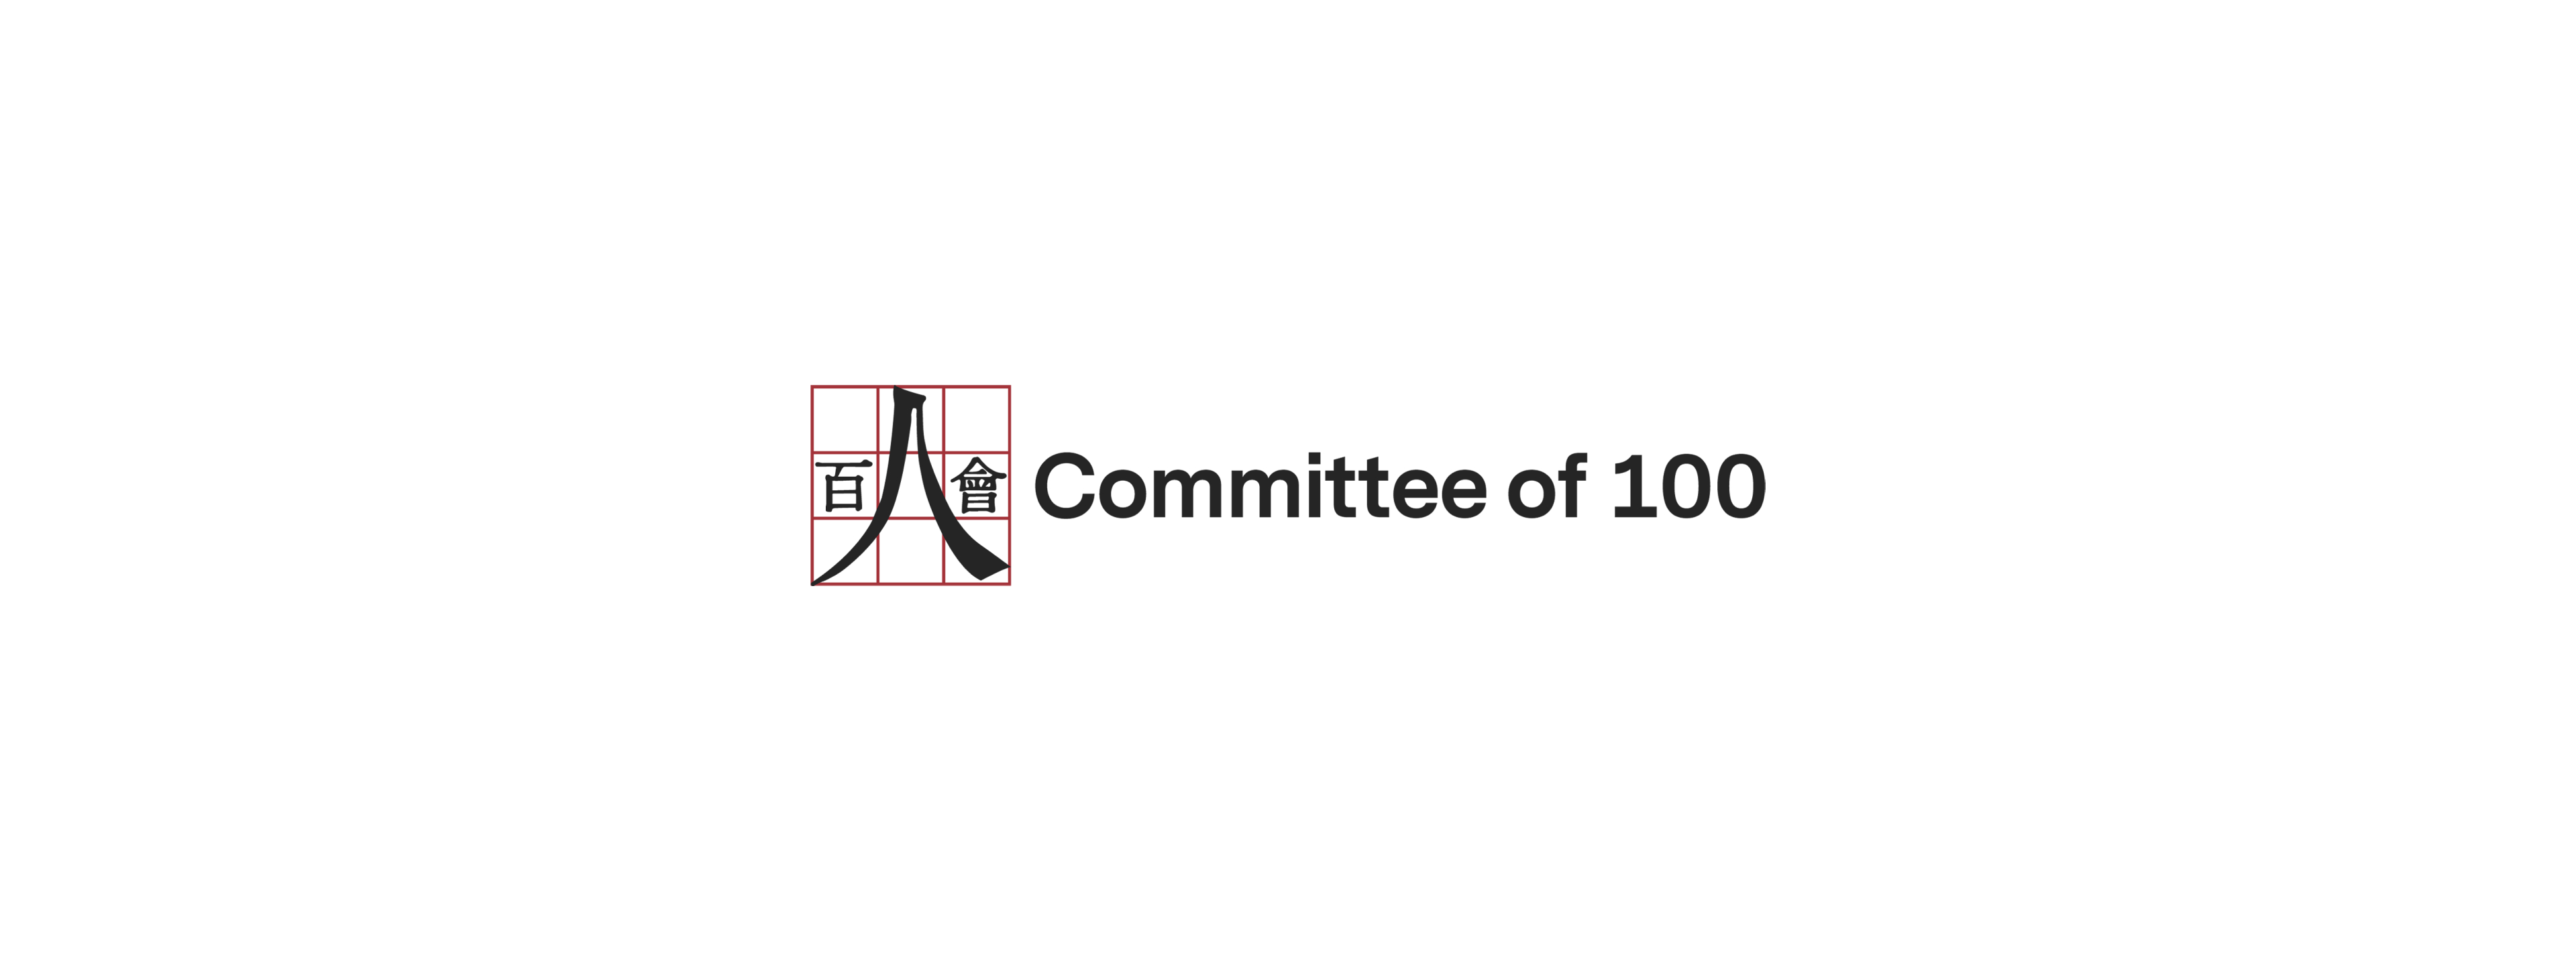 Committee of 100 Connects with More Than 100 Different Groups, Universities and Organizations to Discuss Chinese American Contributions to America Through Its Landmark Study